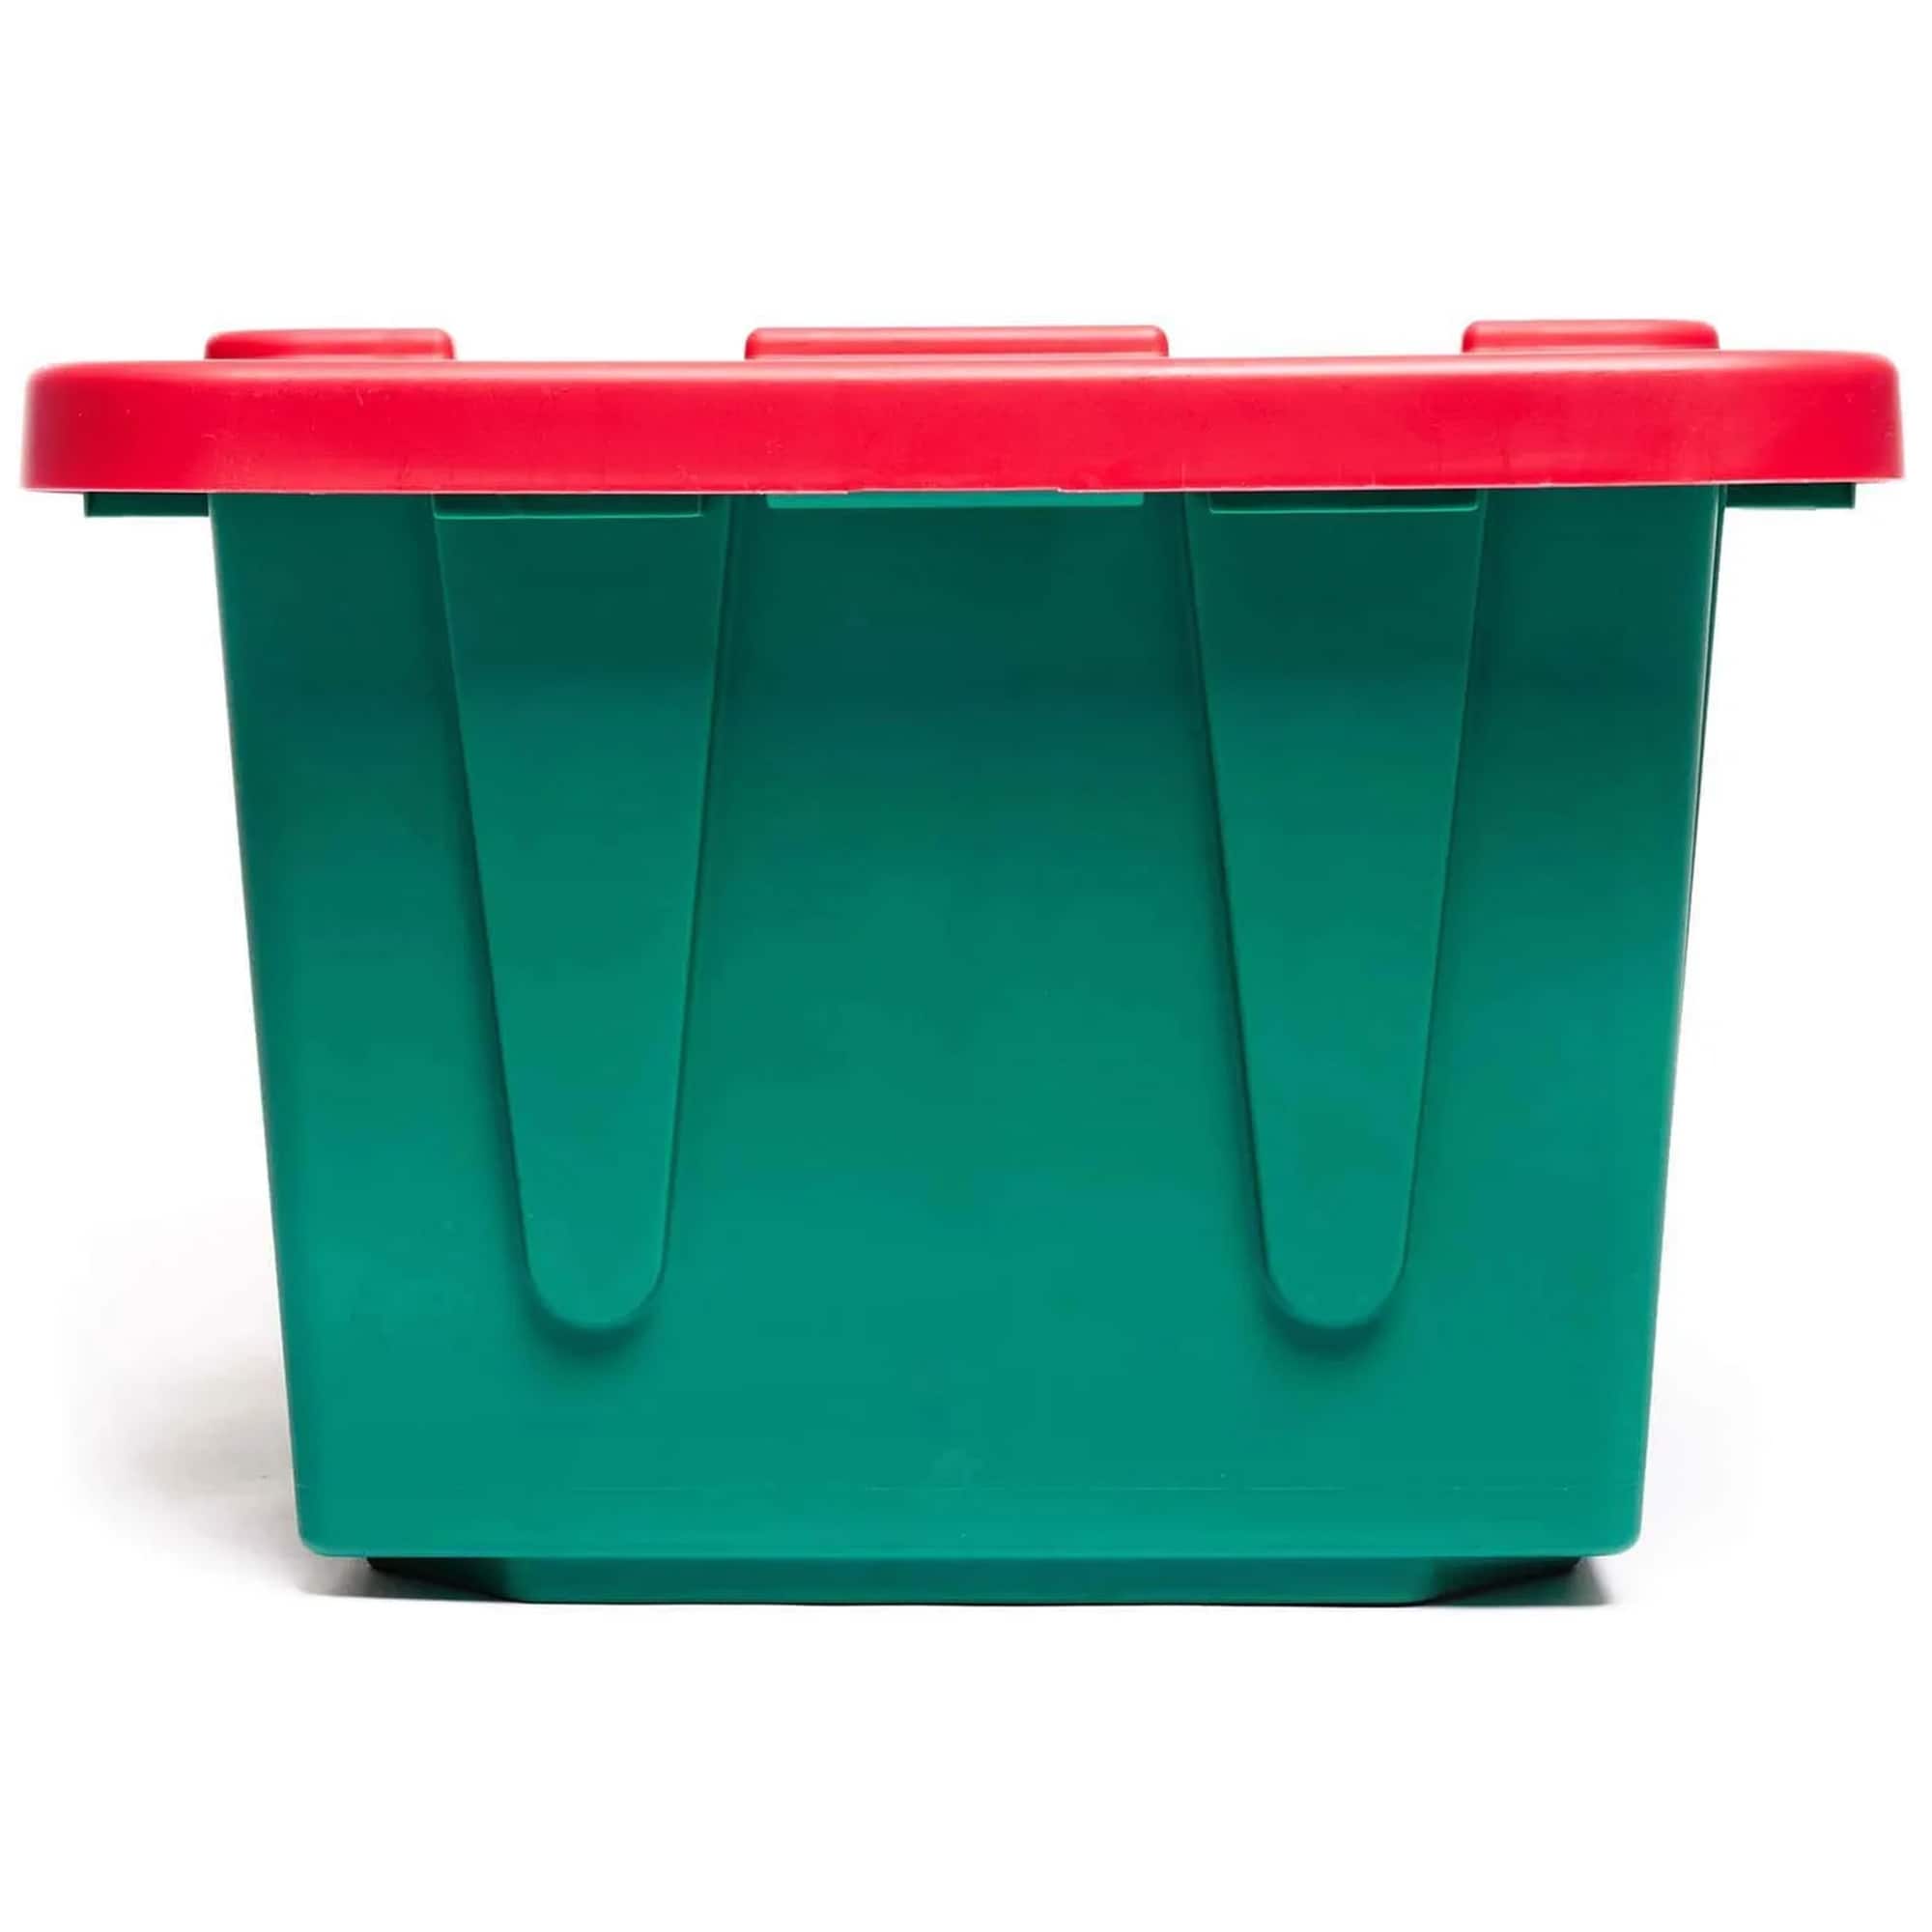 HOMZ 18 Gallon Stackable and Nestable Heavy Duty Plastic Holiday Storage  Container with 4 Way Handles for Organizing, Green/Red, (4 Pack)